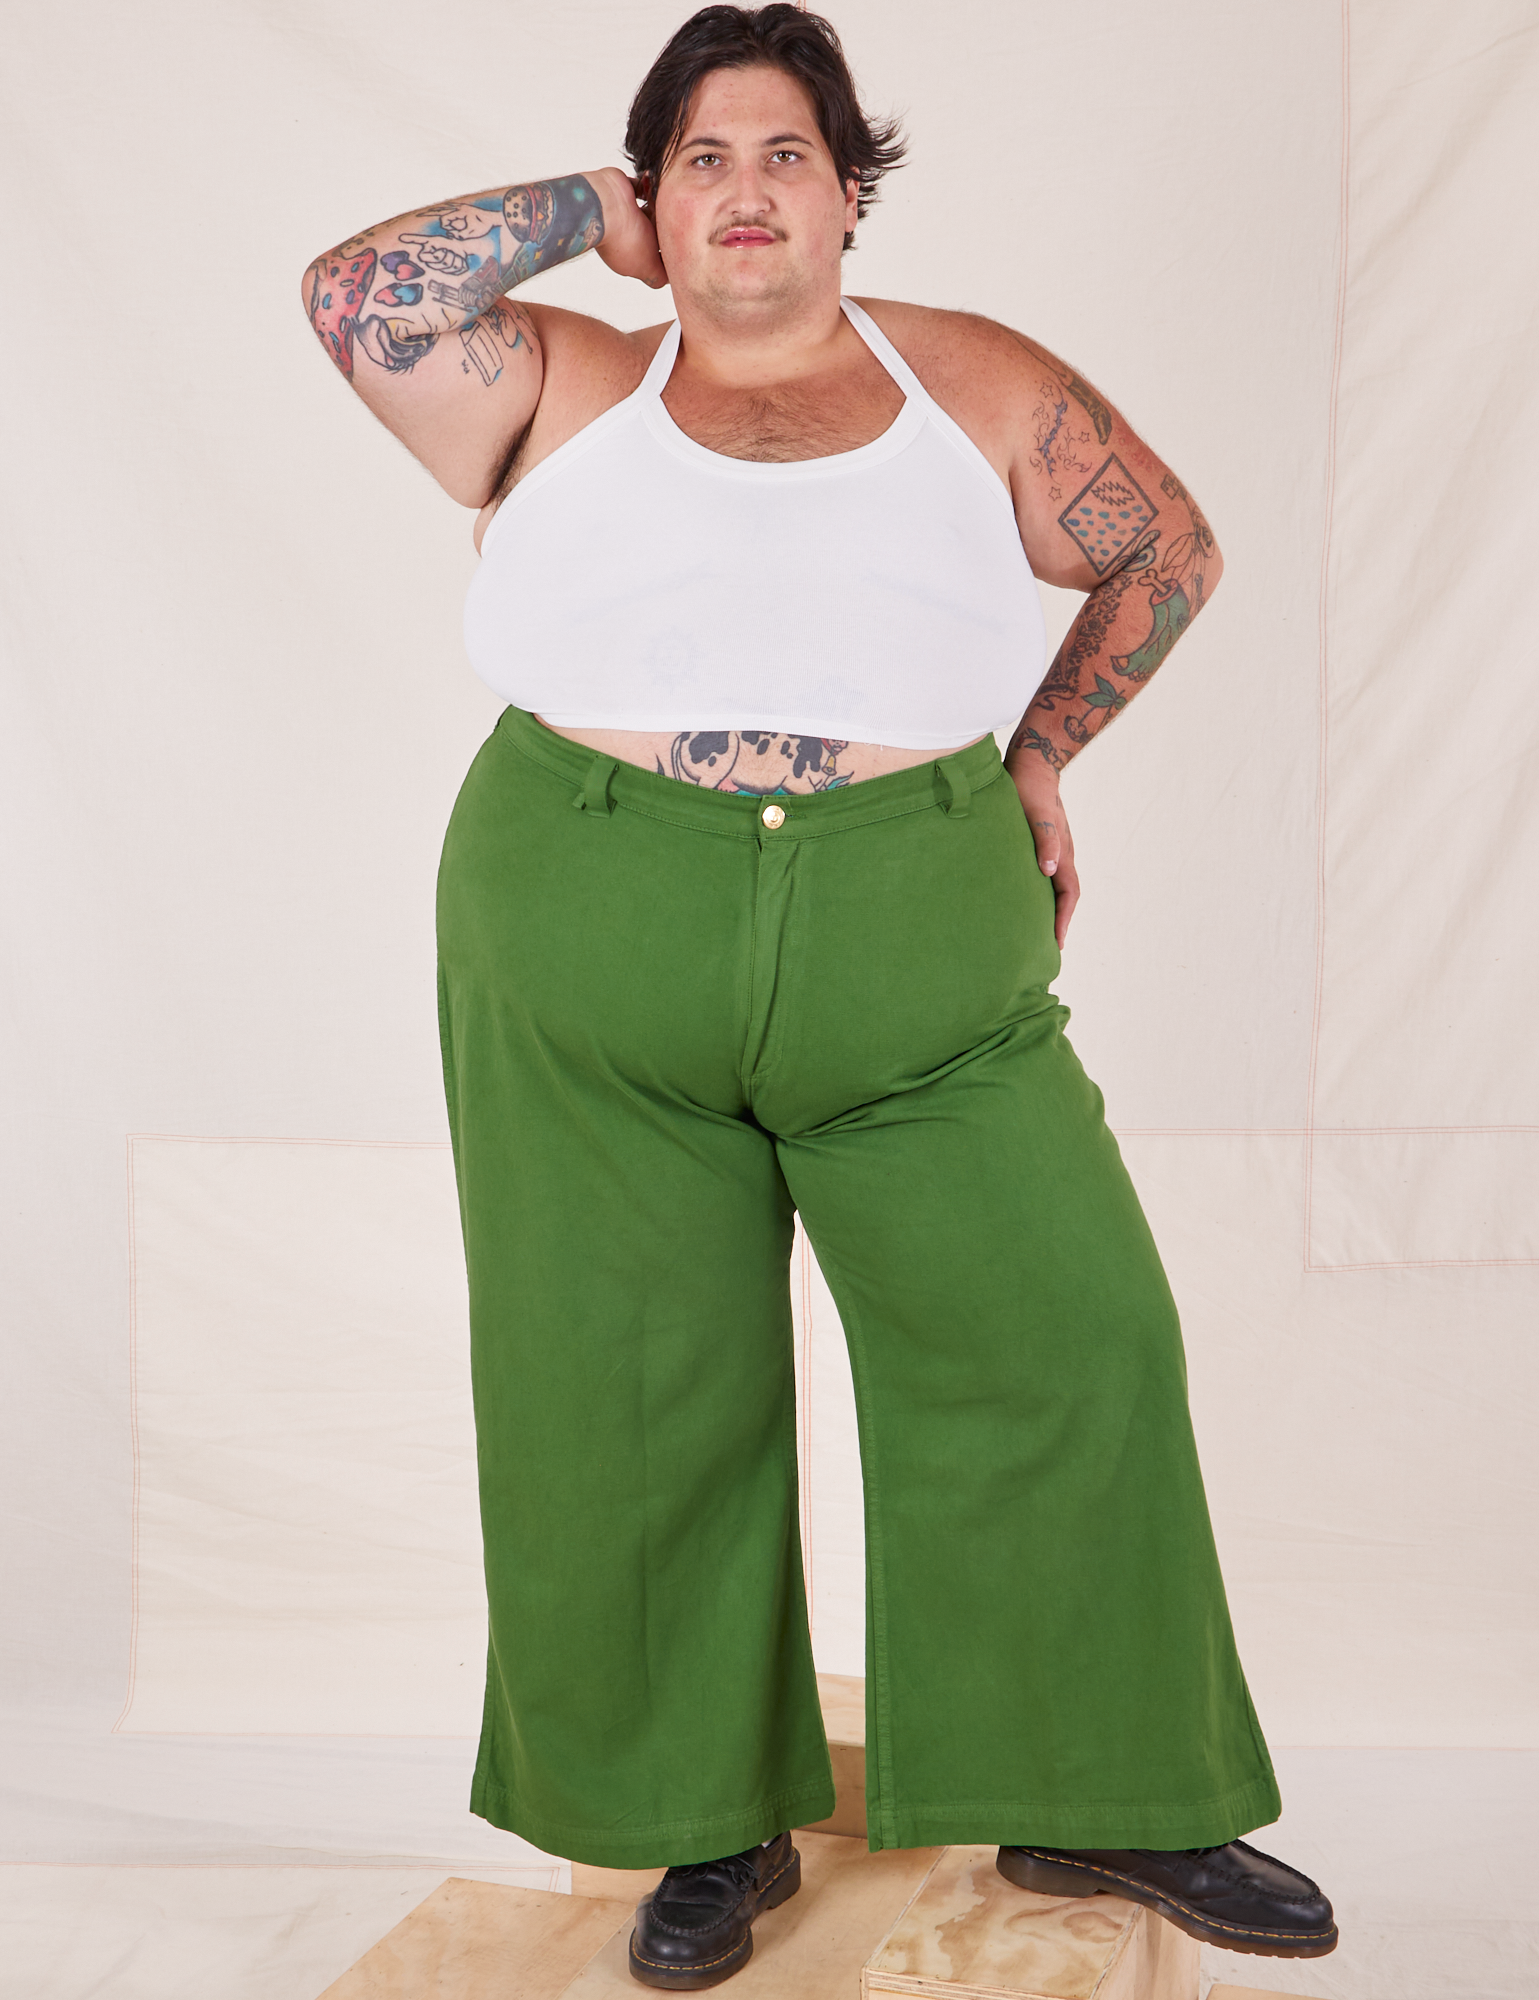 Sam is 5'10" and wearing 3XL Bell Bottoms in Lawn Green paired with vintage off-white Halter Top